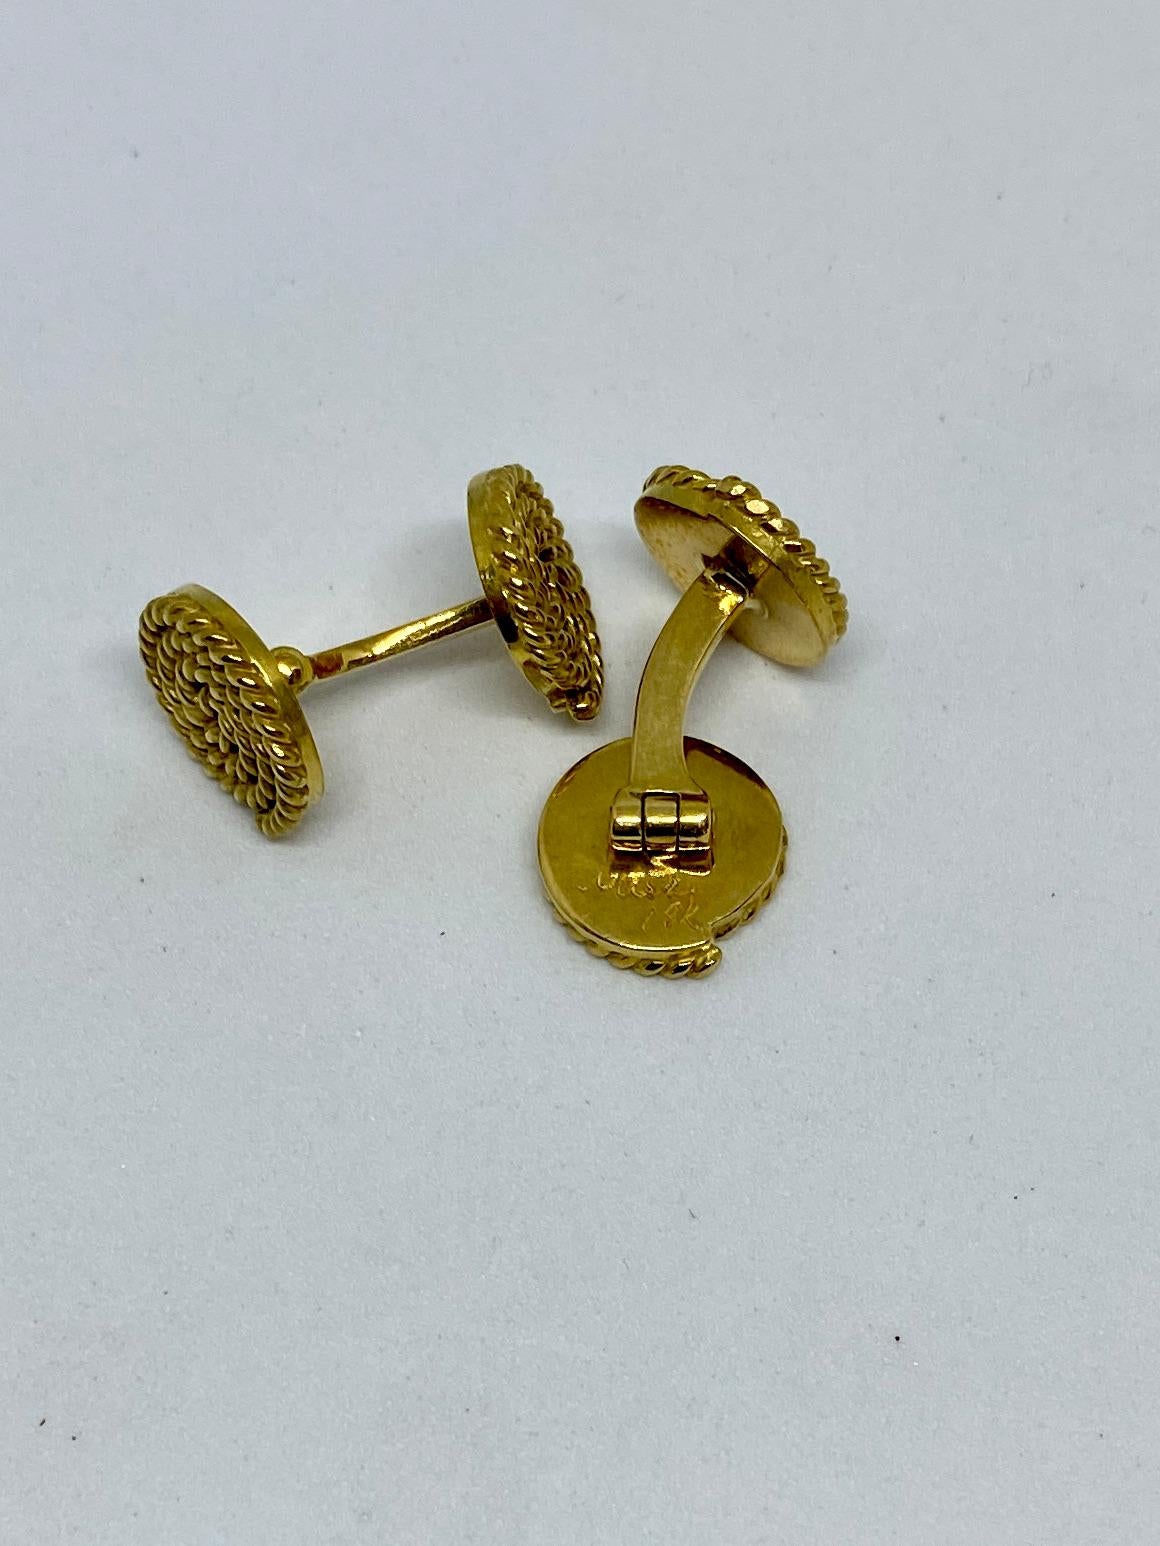 Double-Sided Coiled Rope Cufflinks in 18K Yellow Gold by MISH New York In Excellent Condition For Sale In San Rafael, CA